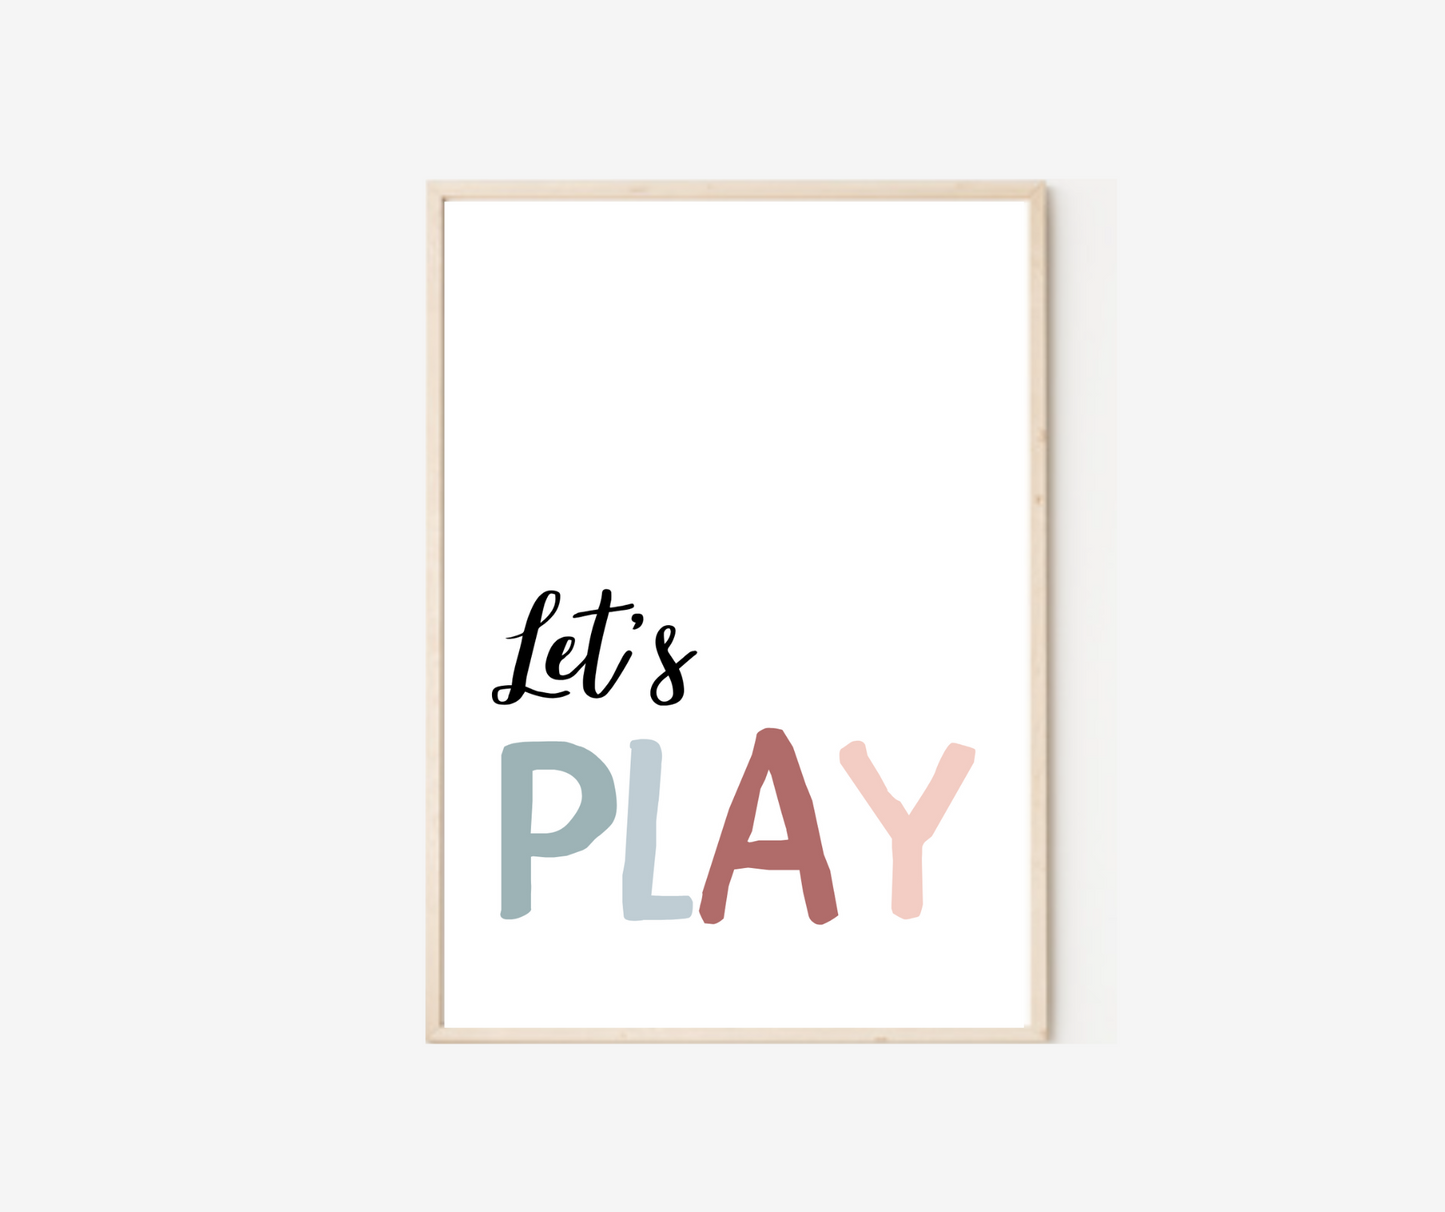 Let's play, Let's read Posters